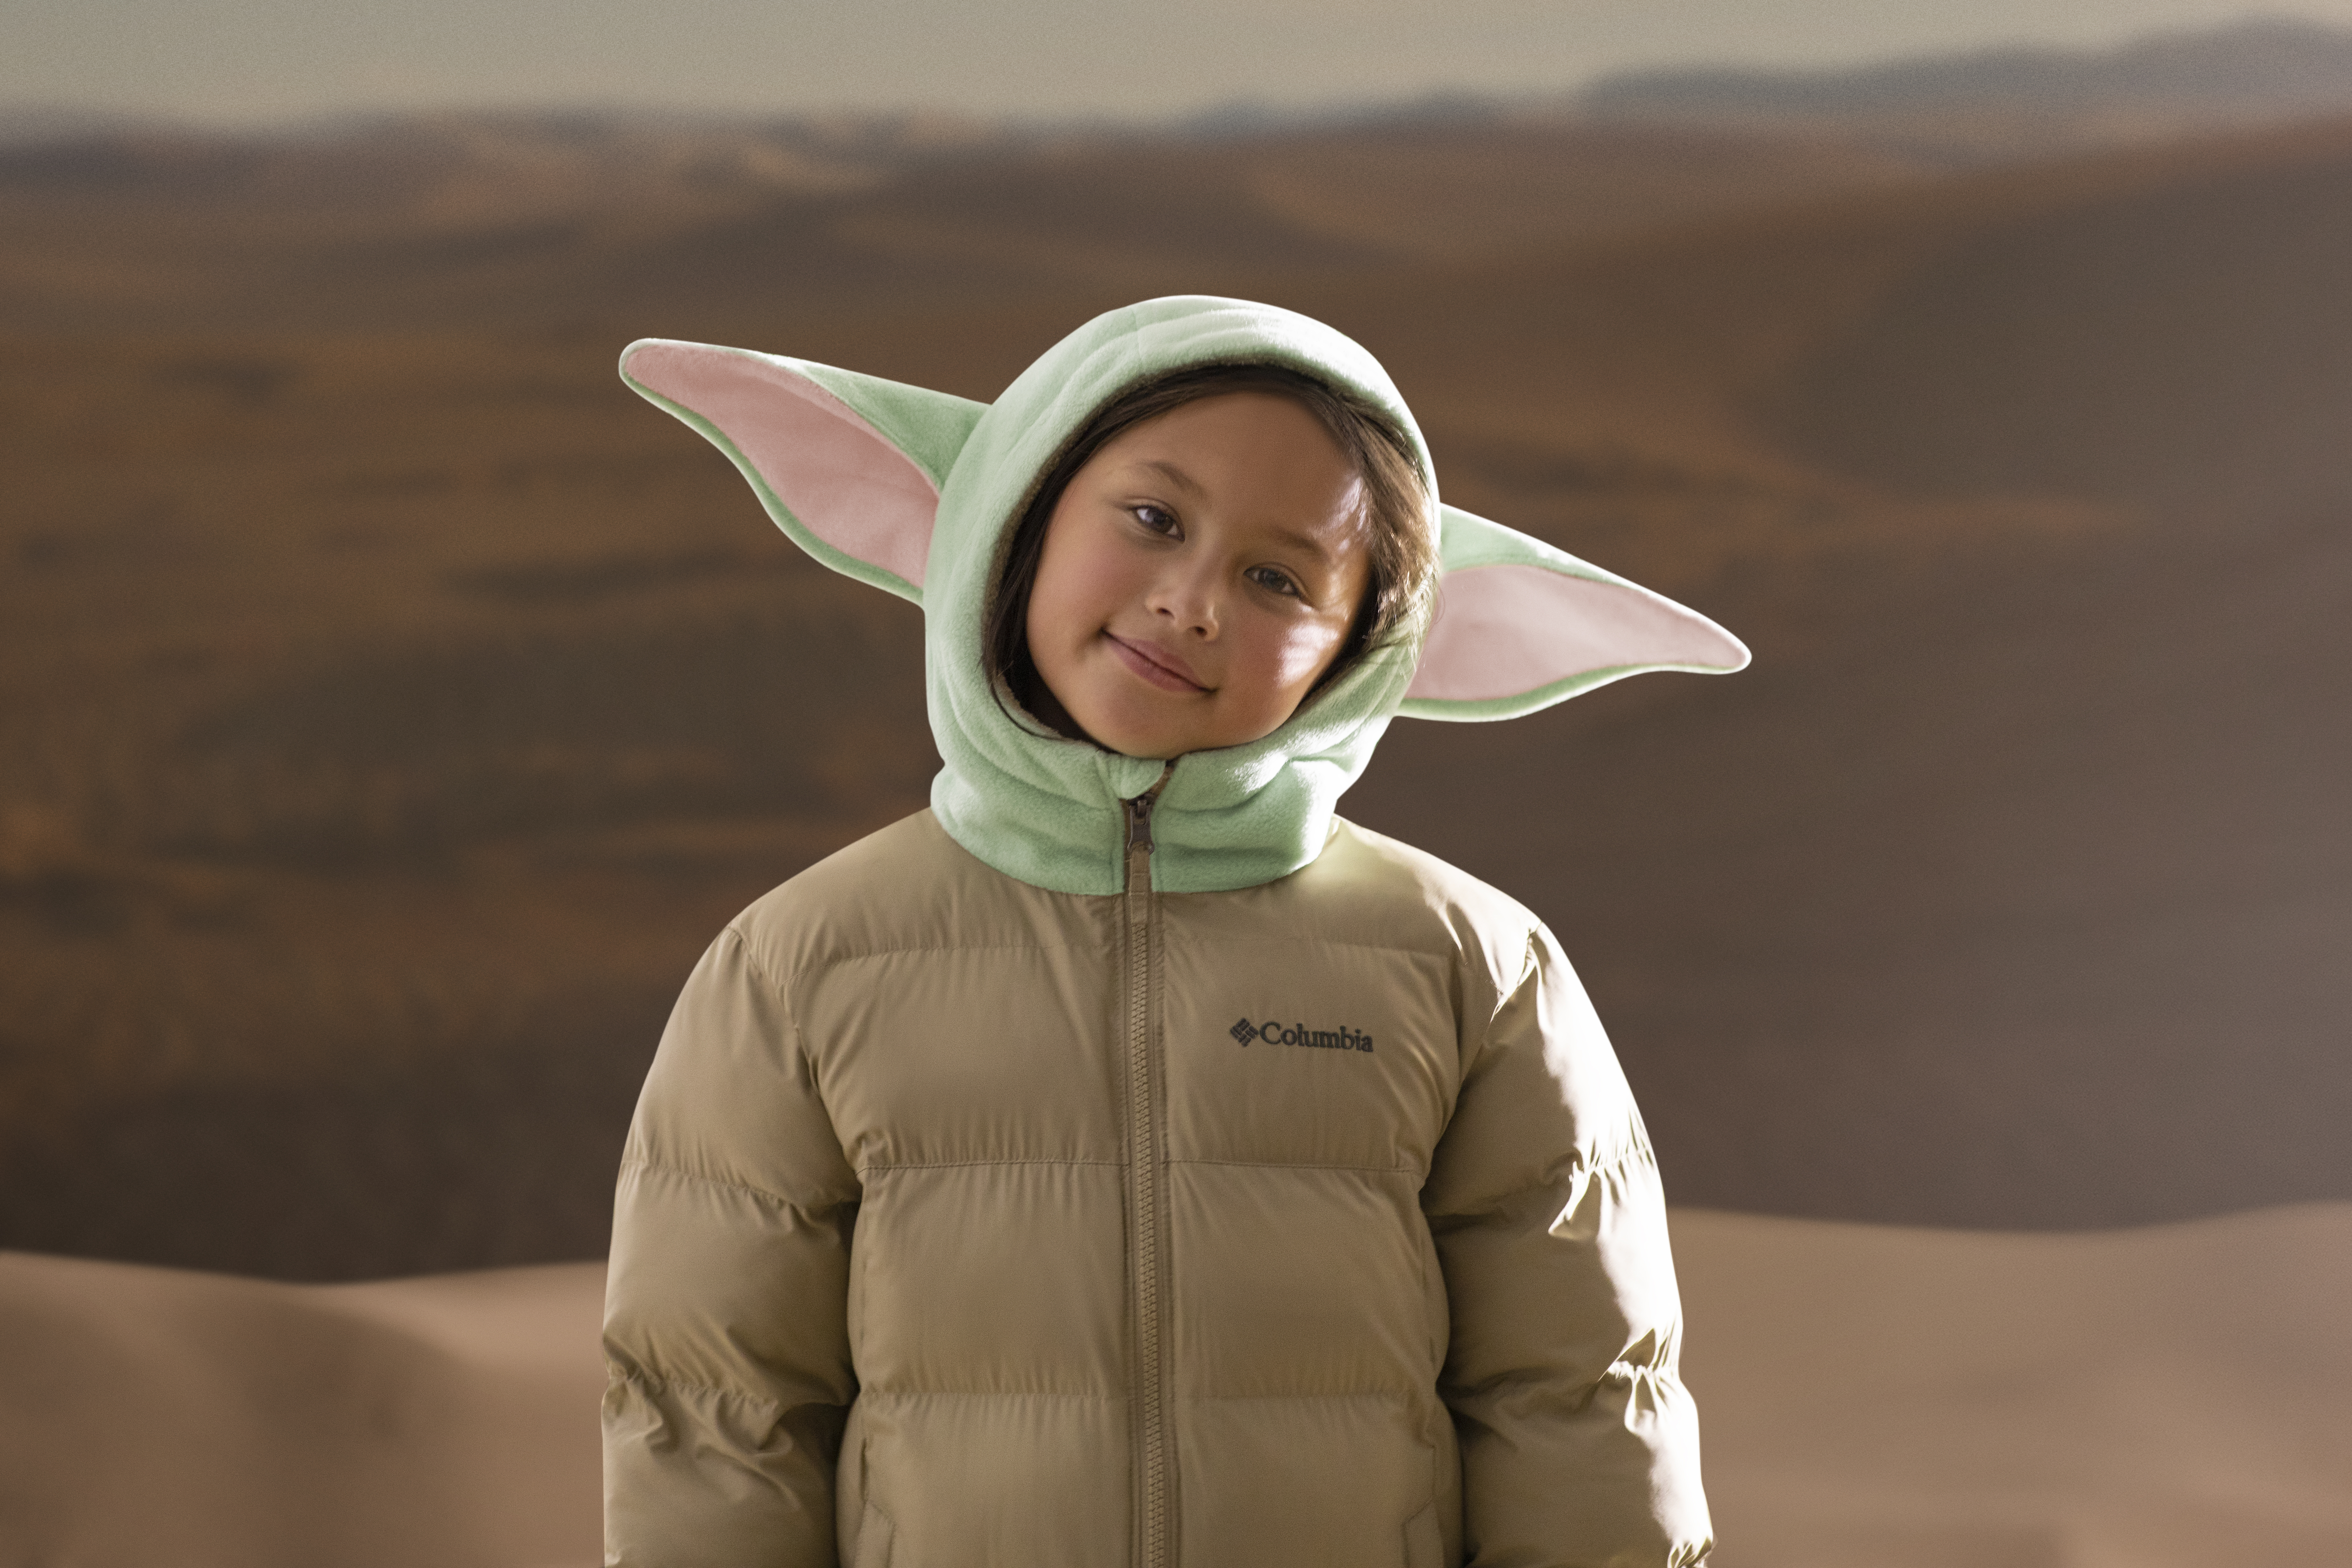 Columbia Sportswear's Mandalorian-inspired Star Wars outerwear collection  releases today: How to buy the limited-edition jackets